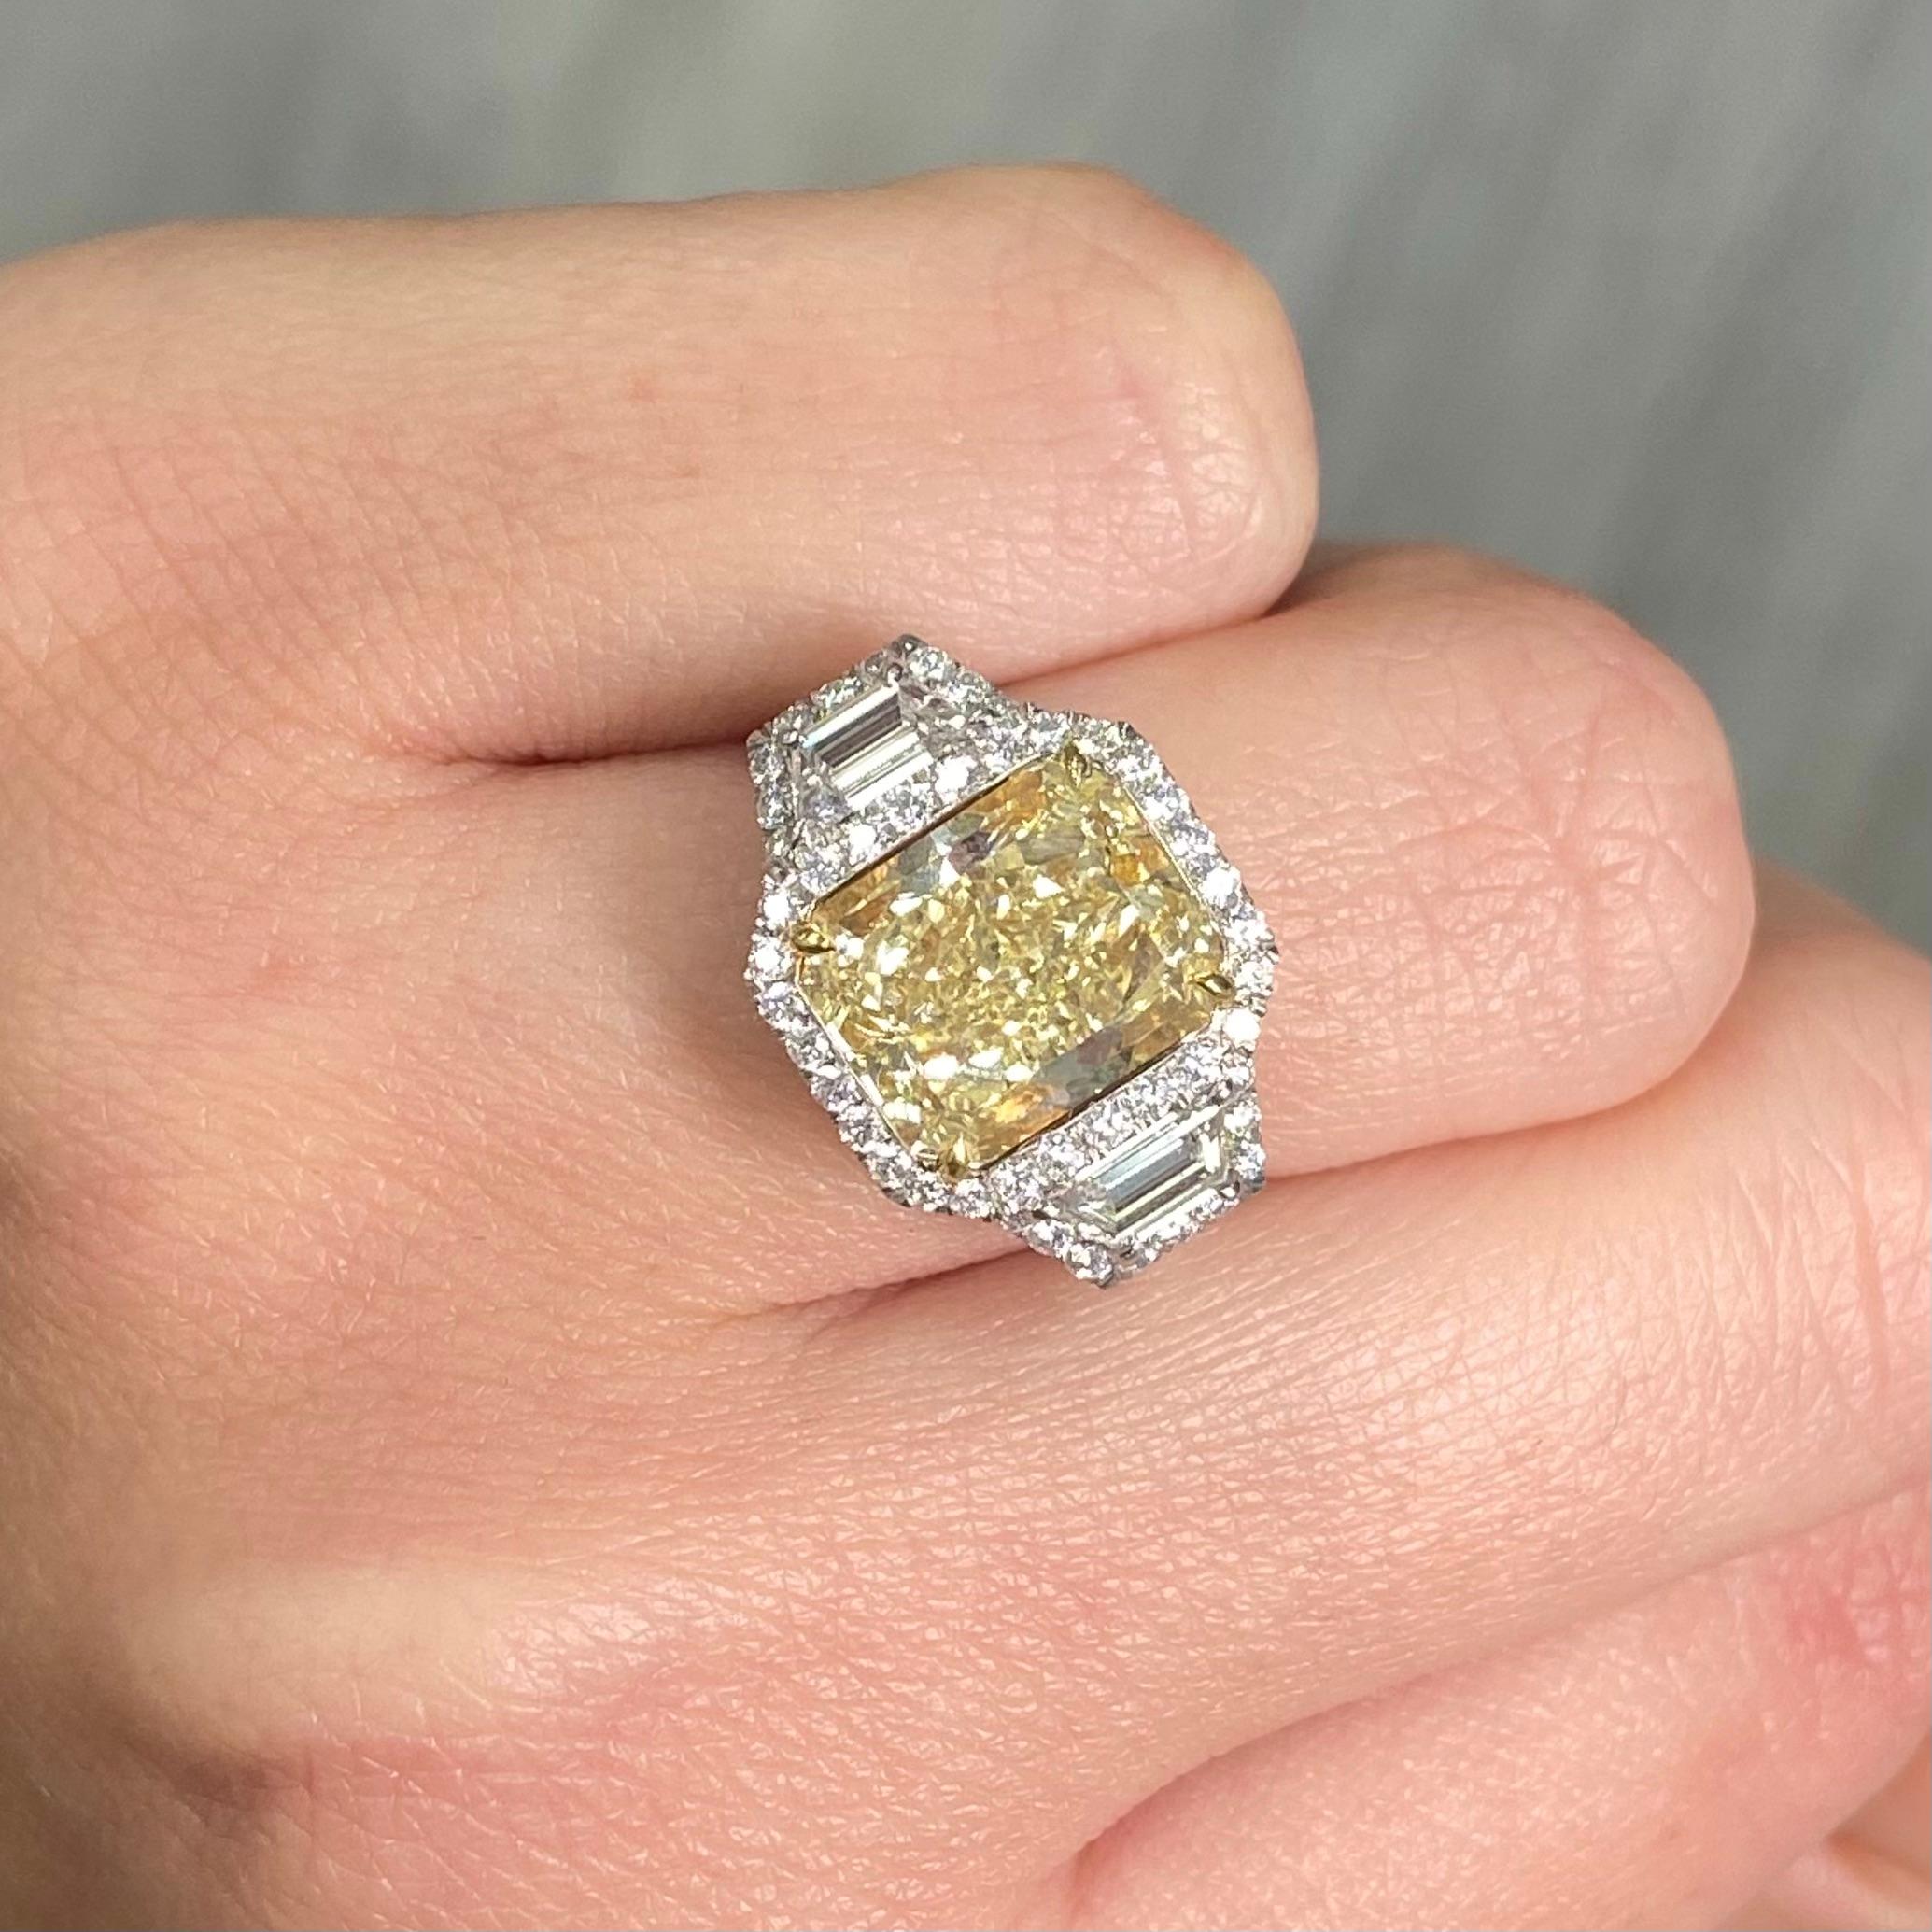 - Huge look with this three stone ring surrounded by halos

5.14 Carat center diamond
Light yellow diamond, Y-Z range
Elongated radiant cut, 1.21:1 ratio
VS2 Clarity 
Set with .64 Carats White Trapezoids H VS1
Total Ring Weight 6.65 Carats
Platinum